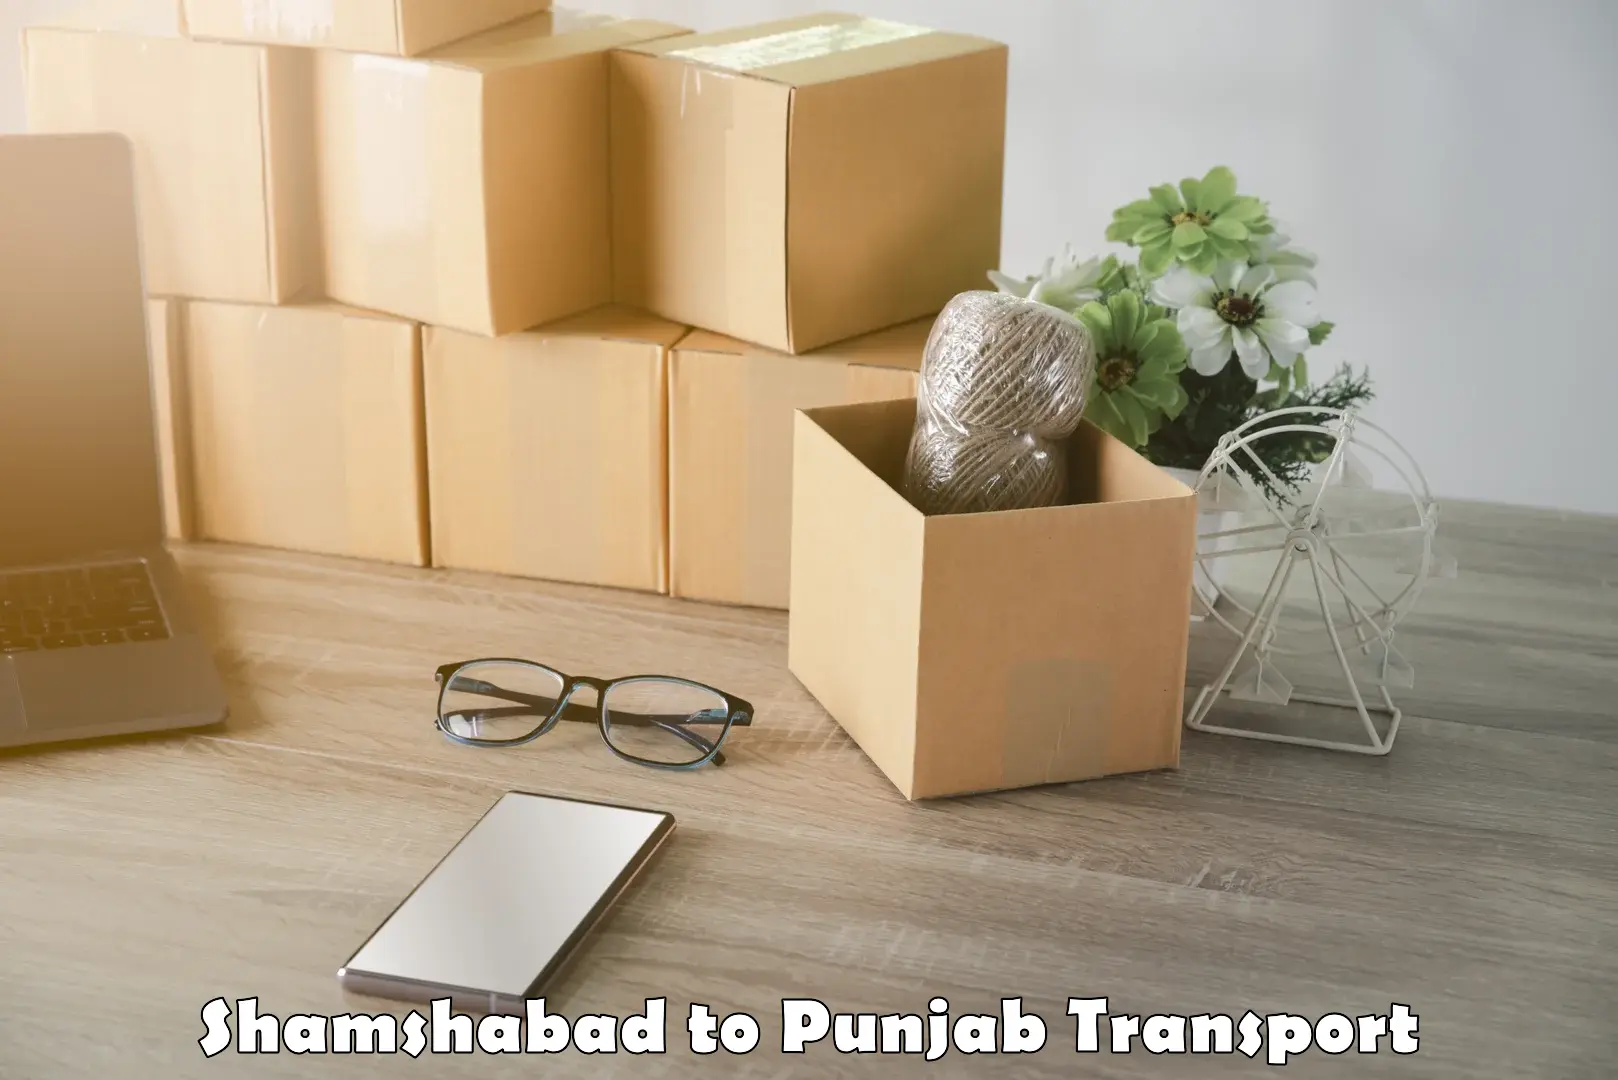 Daily parcel service transport Shamshabad to Patiala